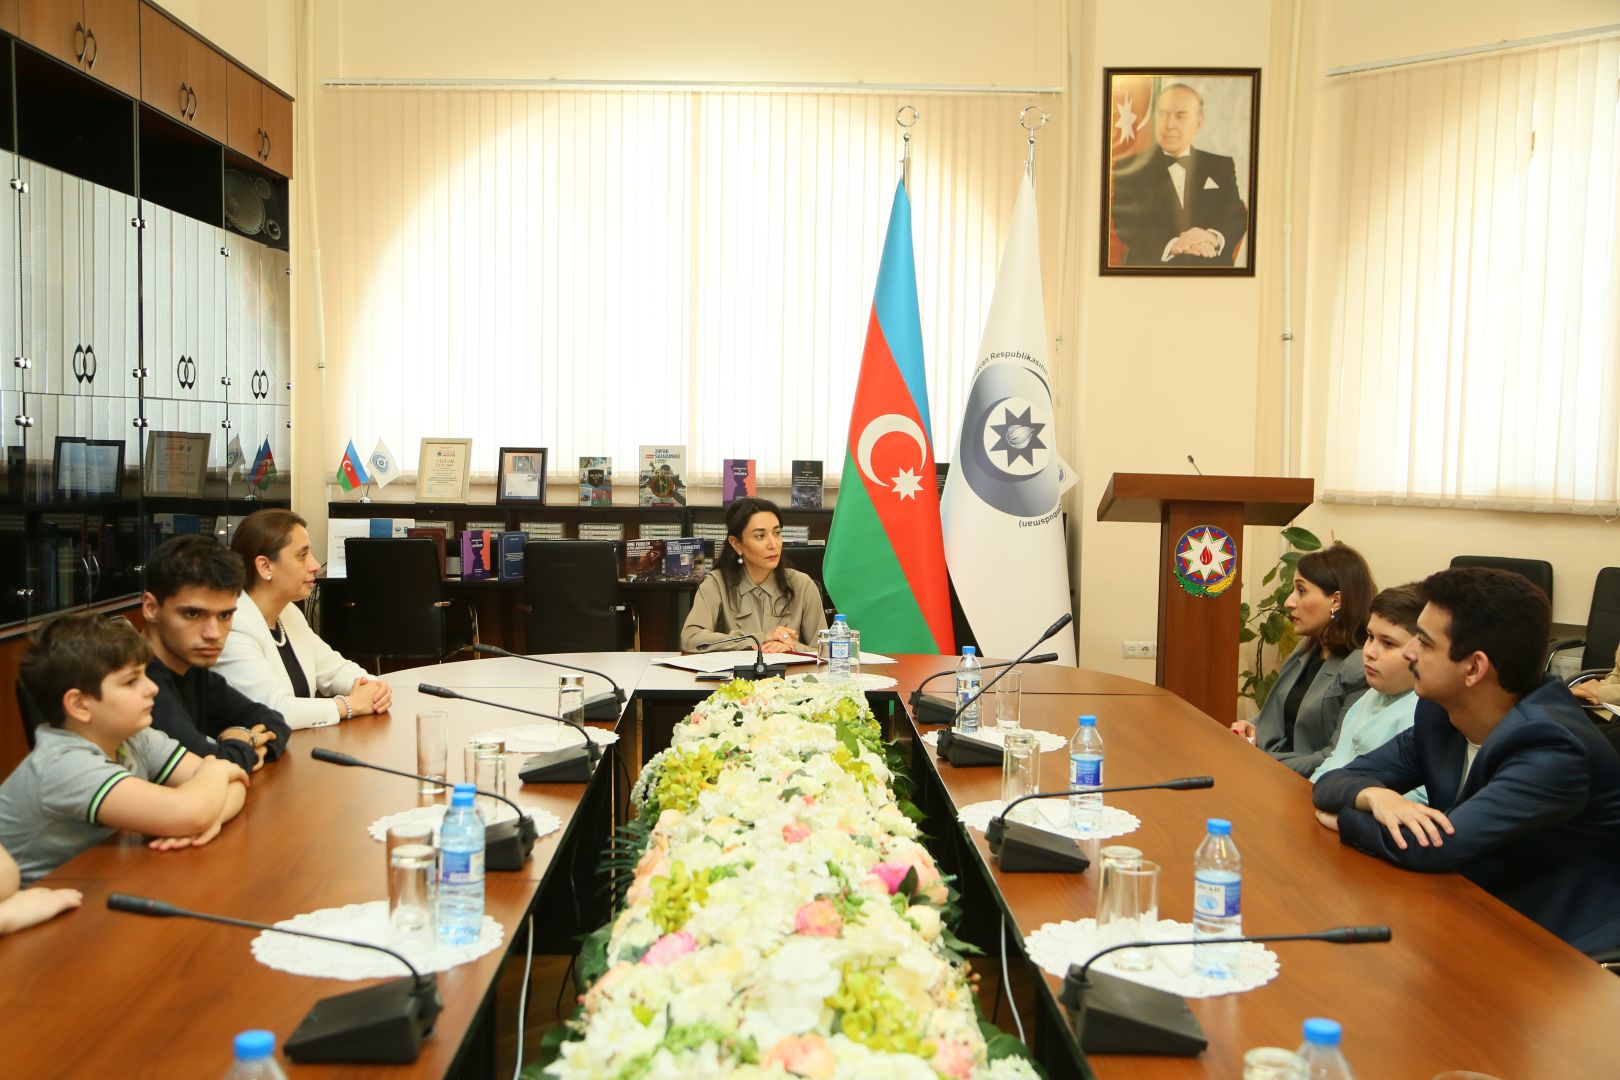 Azerbaijani Human Rights Commissioner meets with autistic people [PHOTOS]